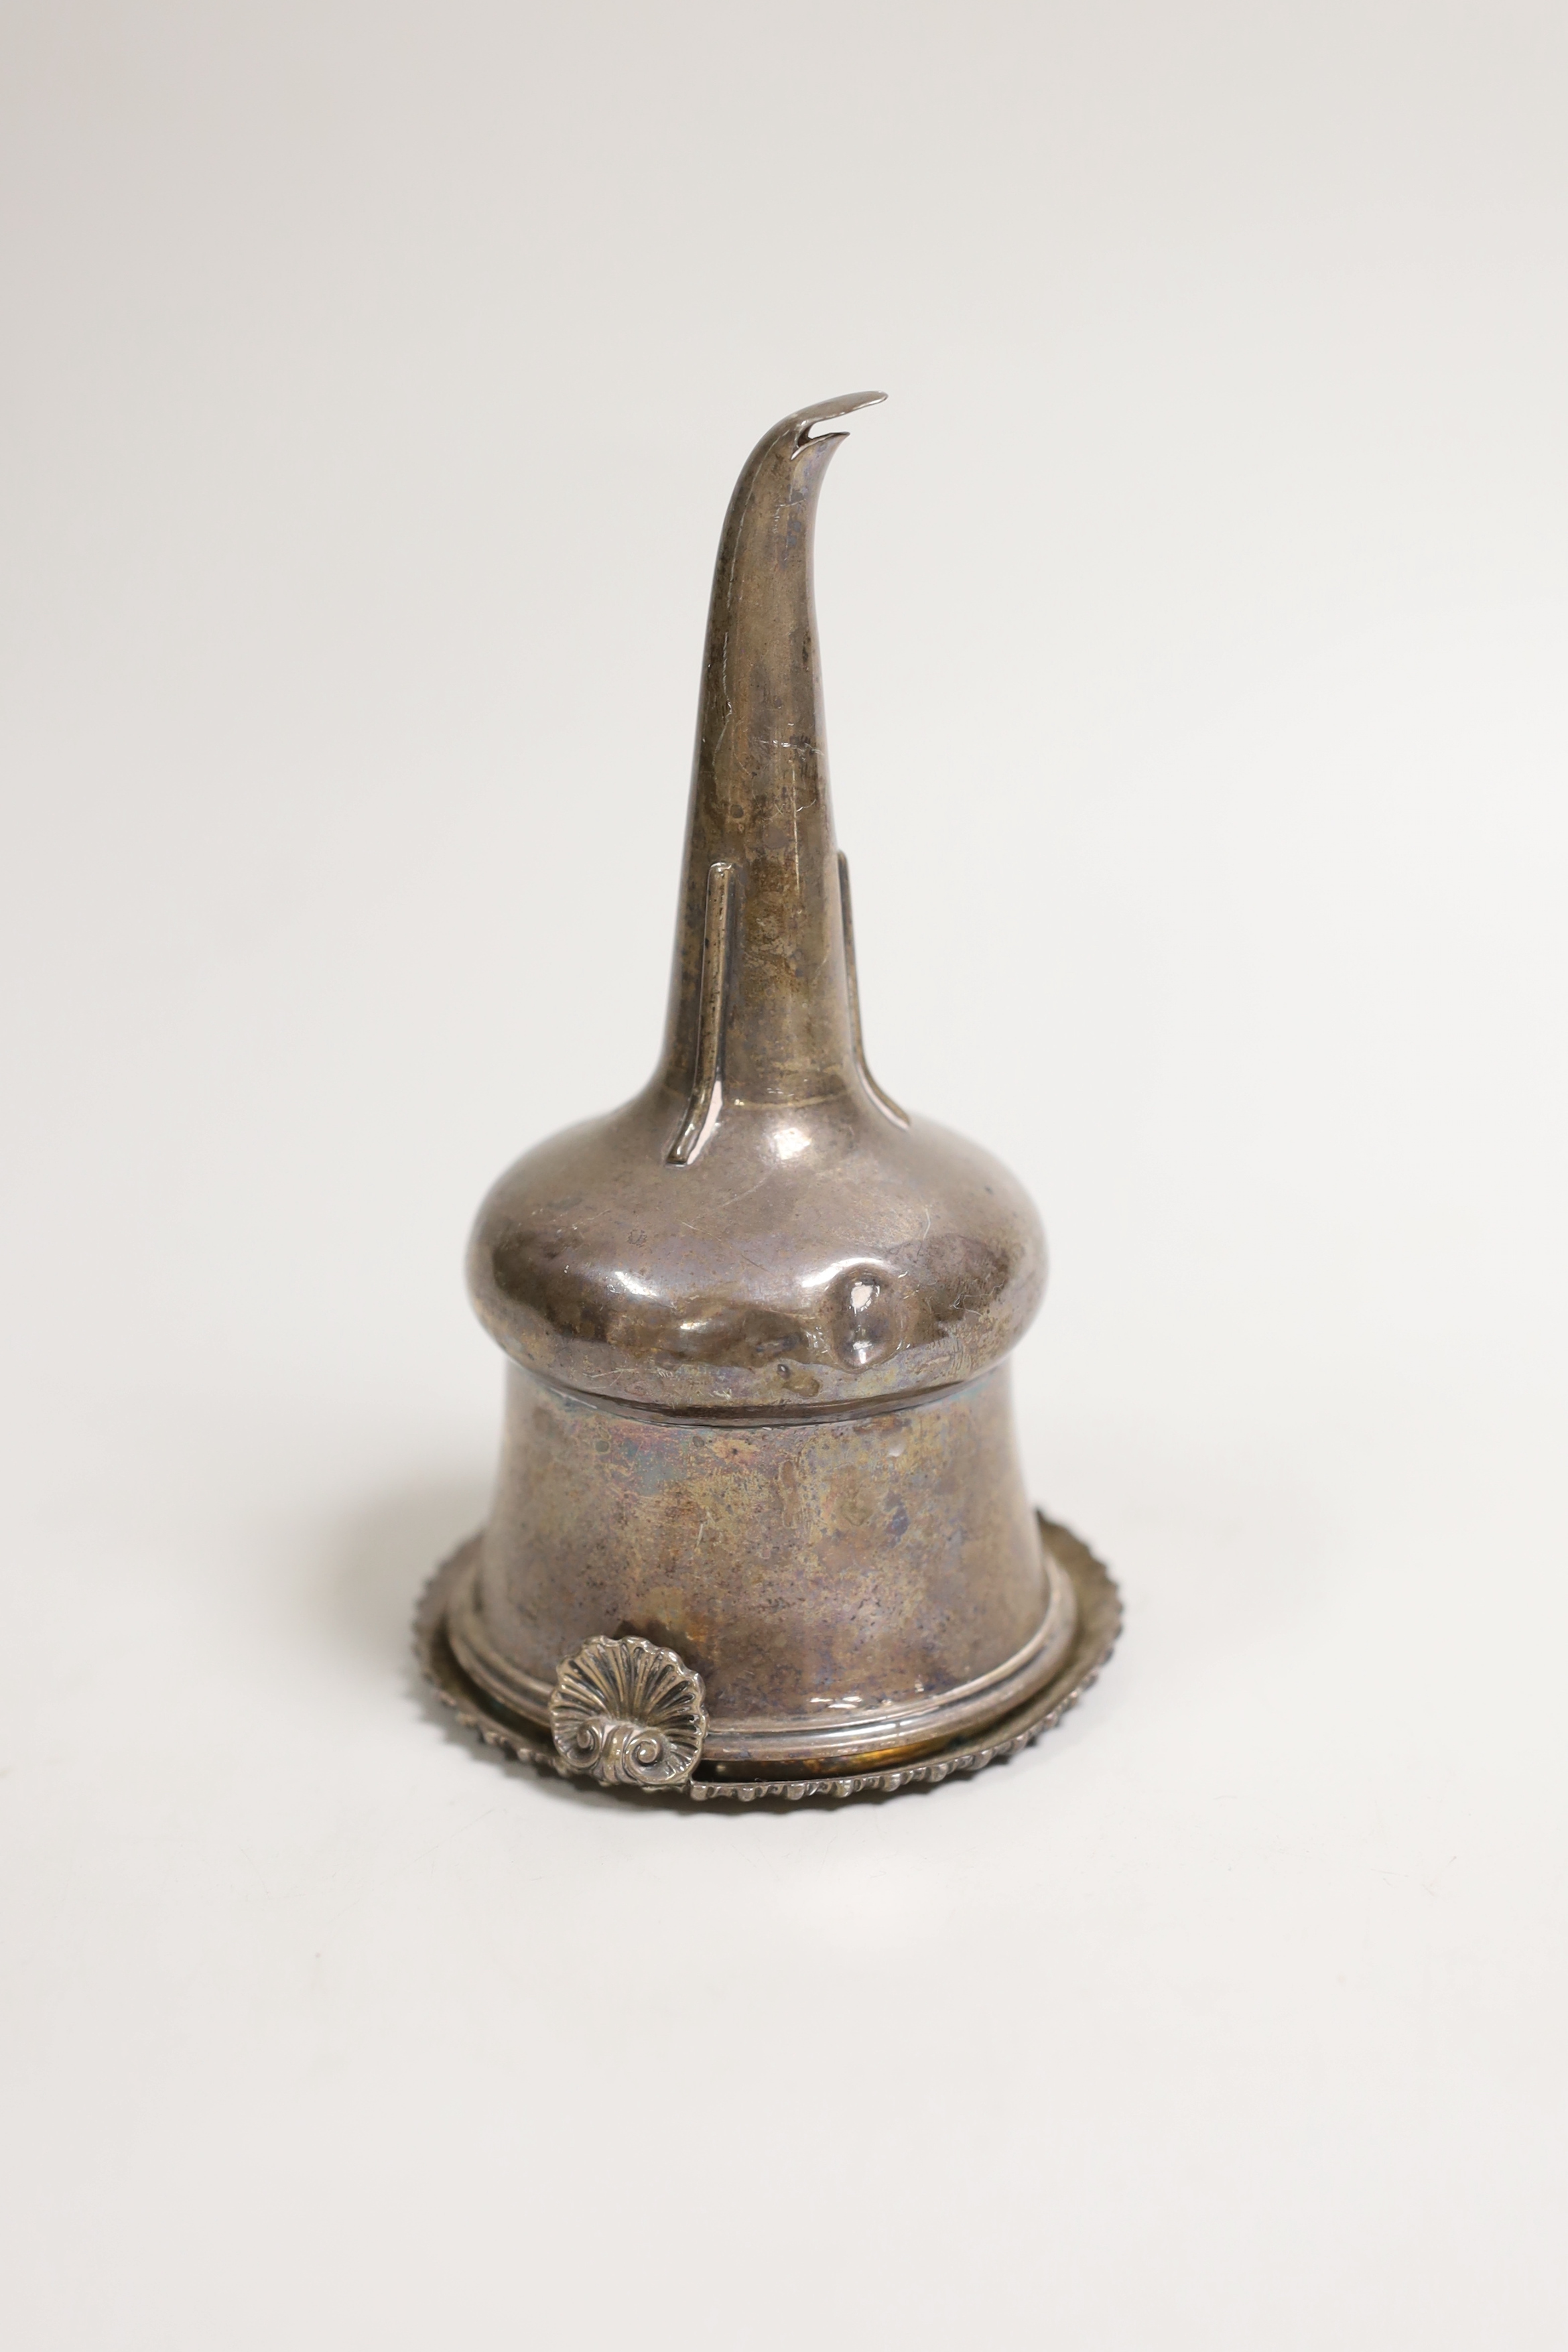 A George III silver wine funnel, with gadrooned border, marks rubbed, possibly Emes & Barnard, circa 1810, 14.1cm, 5.4oz.                                                                                                   